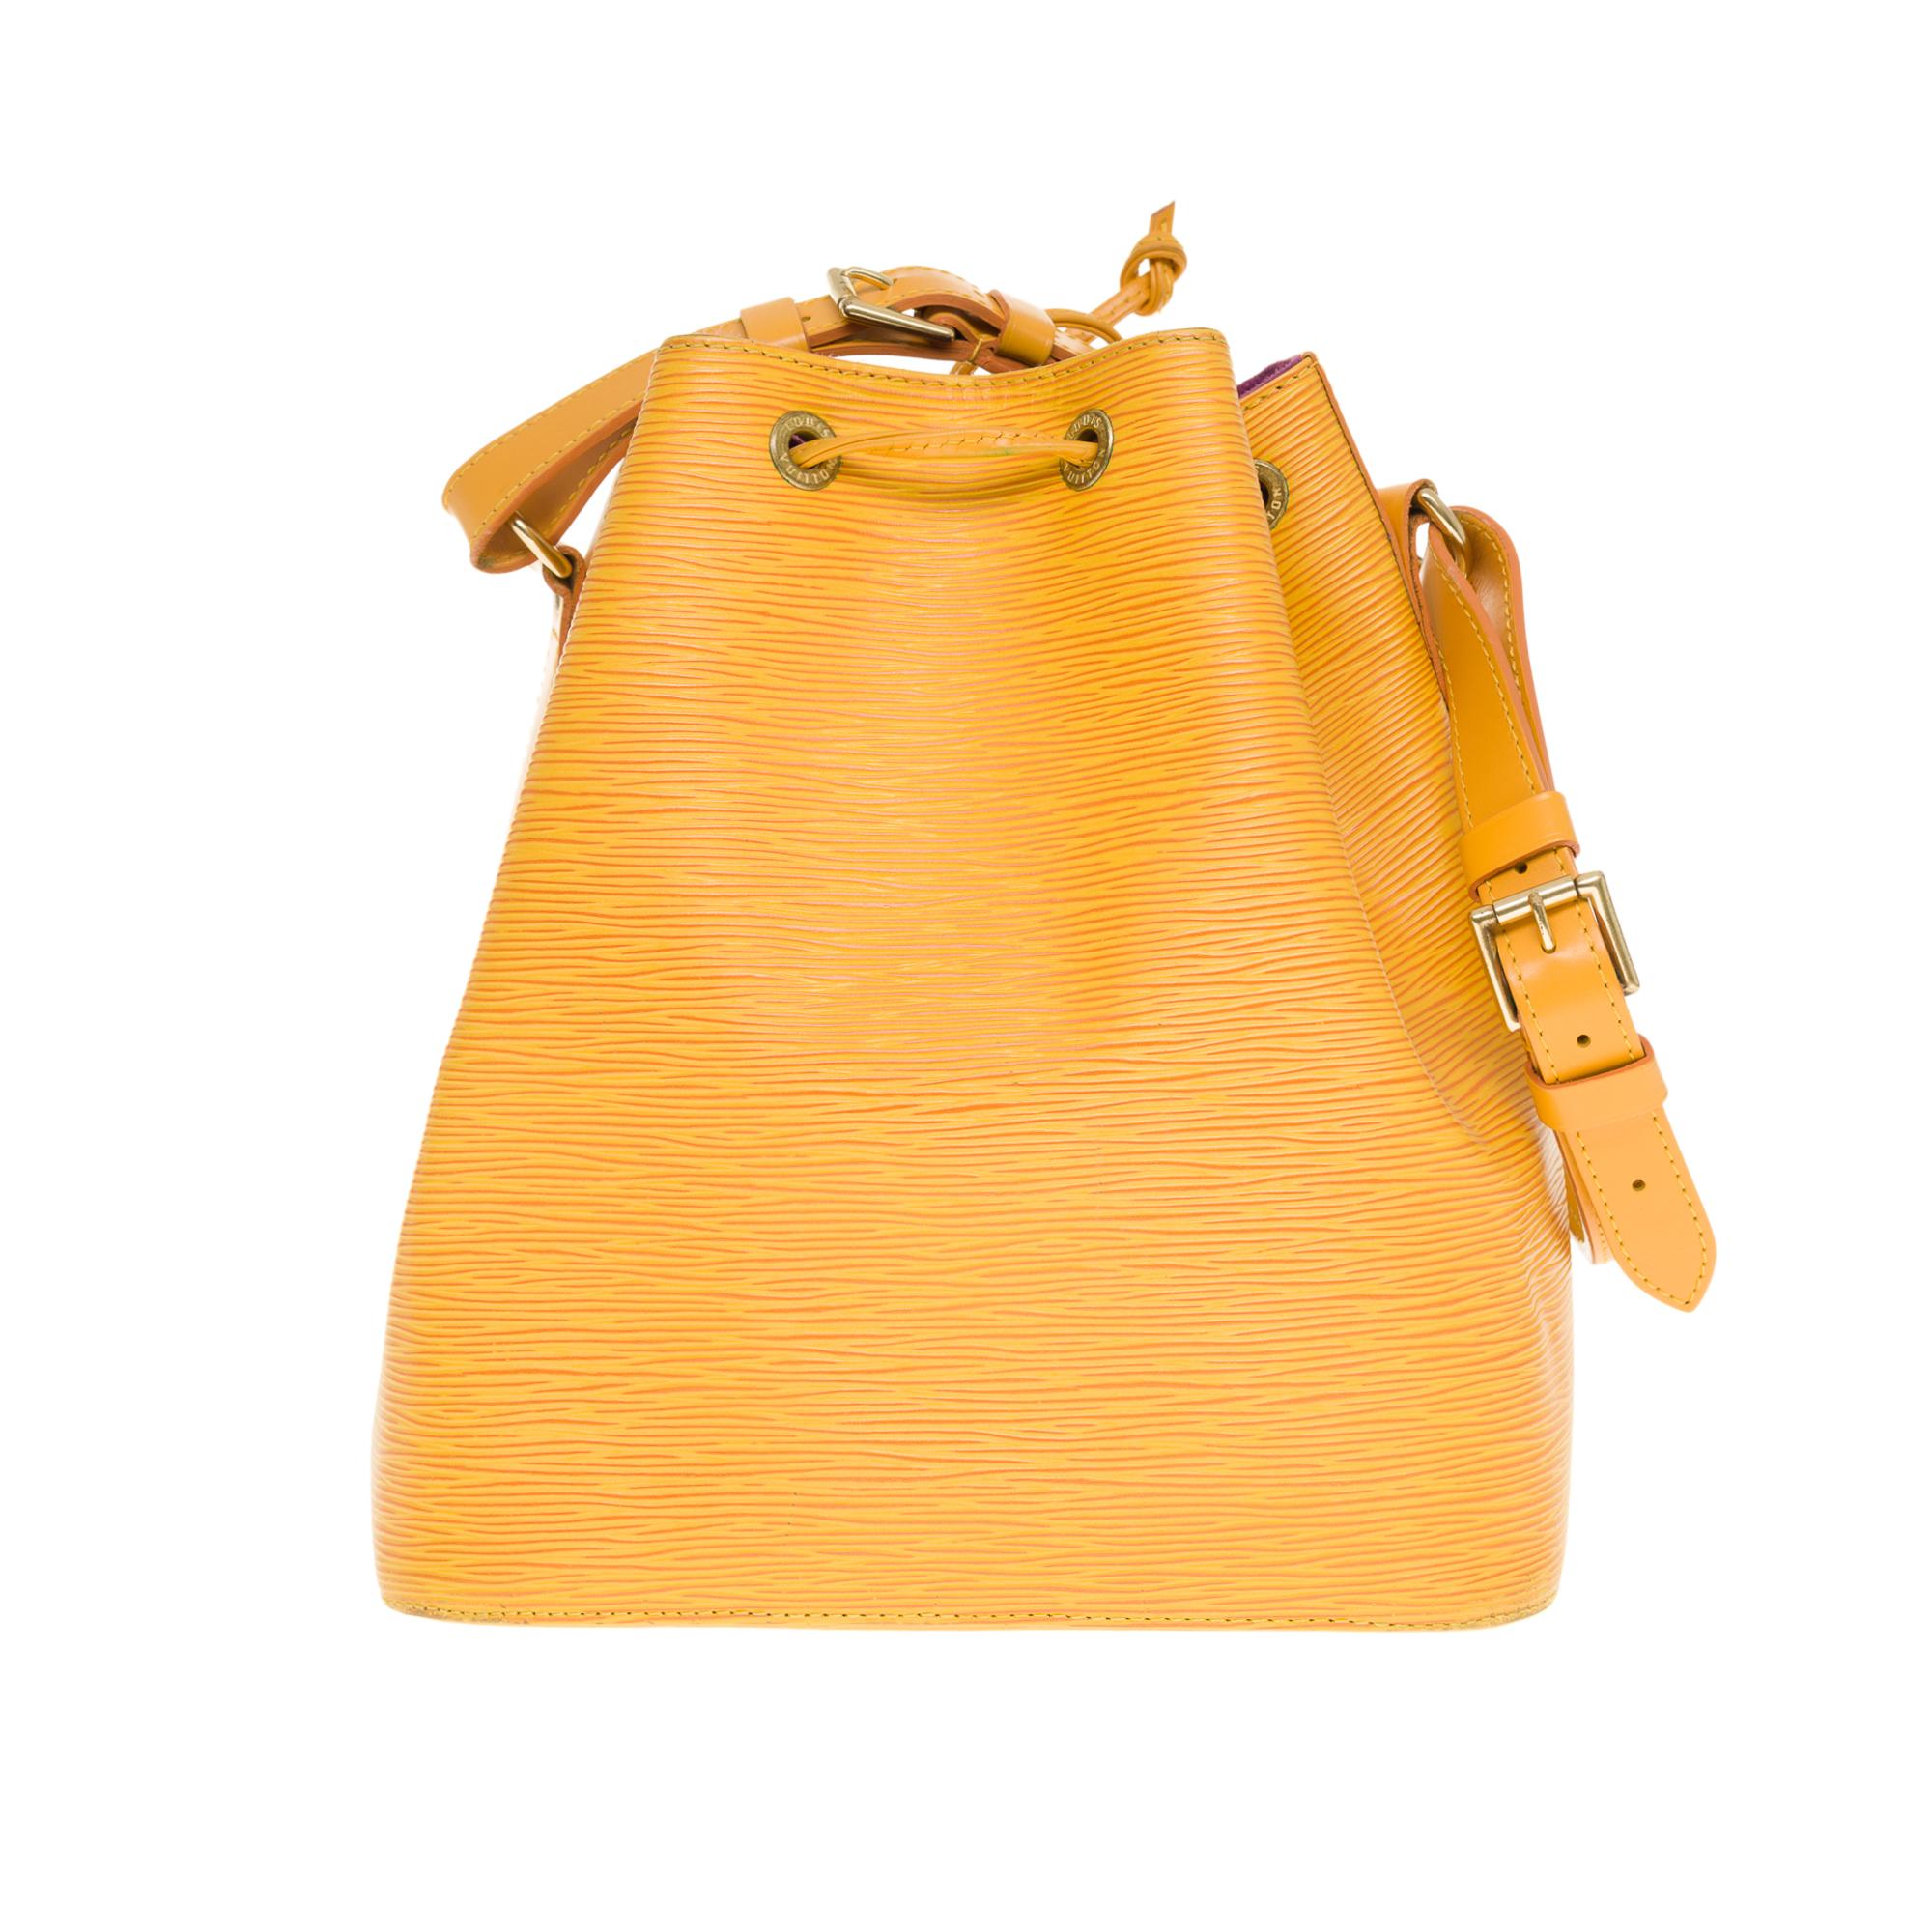 
The Essential Louis Vuitton small Noé handbag in yellow epi leather gold button, gold metal hardware, a simple adjustable handle in yellow leather allowing a hand or shoulder support

Leather strap closure
Interior lining in purple suede
Signature: